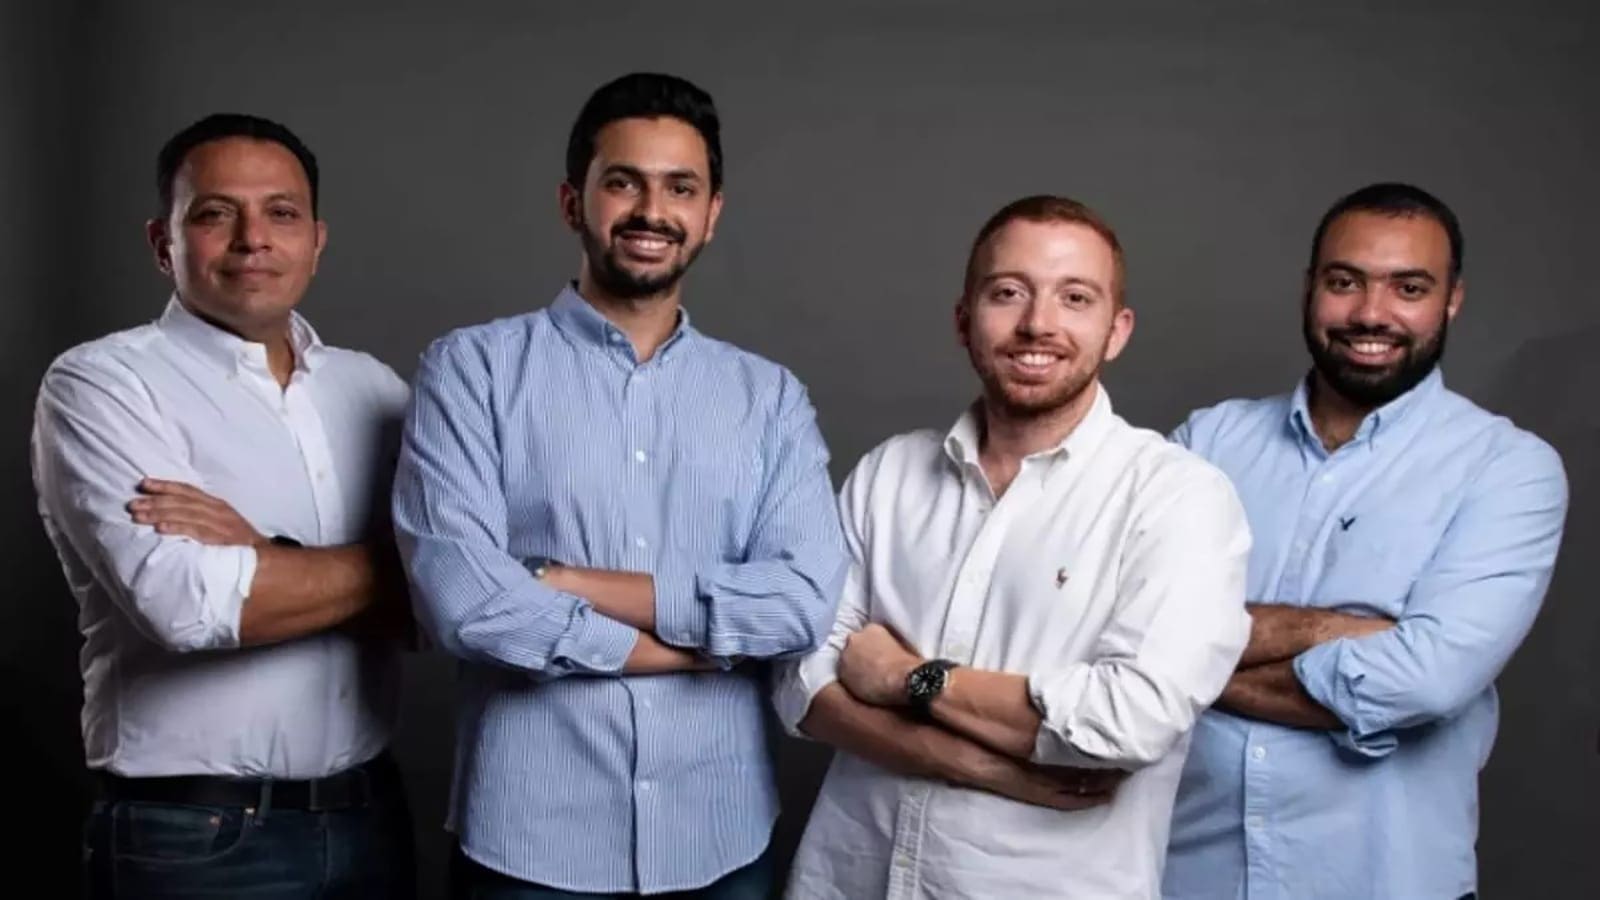 E-commerce marketplace start-up Fatura secures US$3m in pre-series A round to expand offering